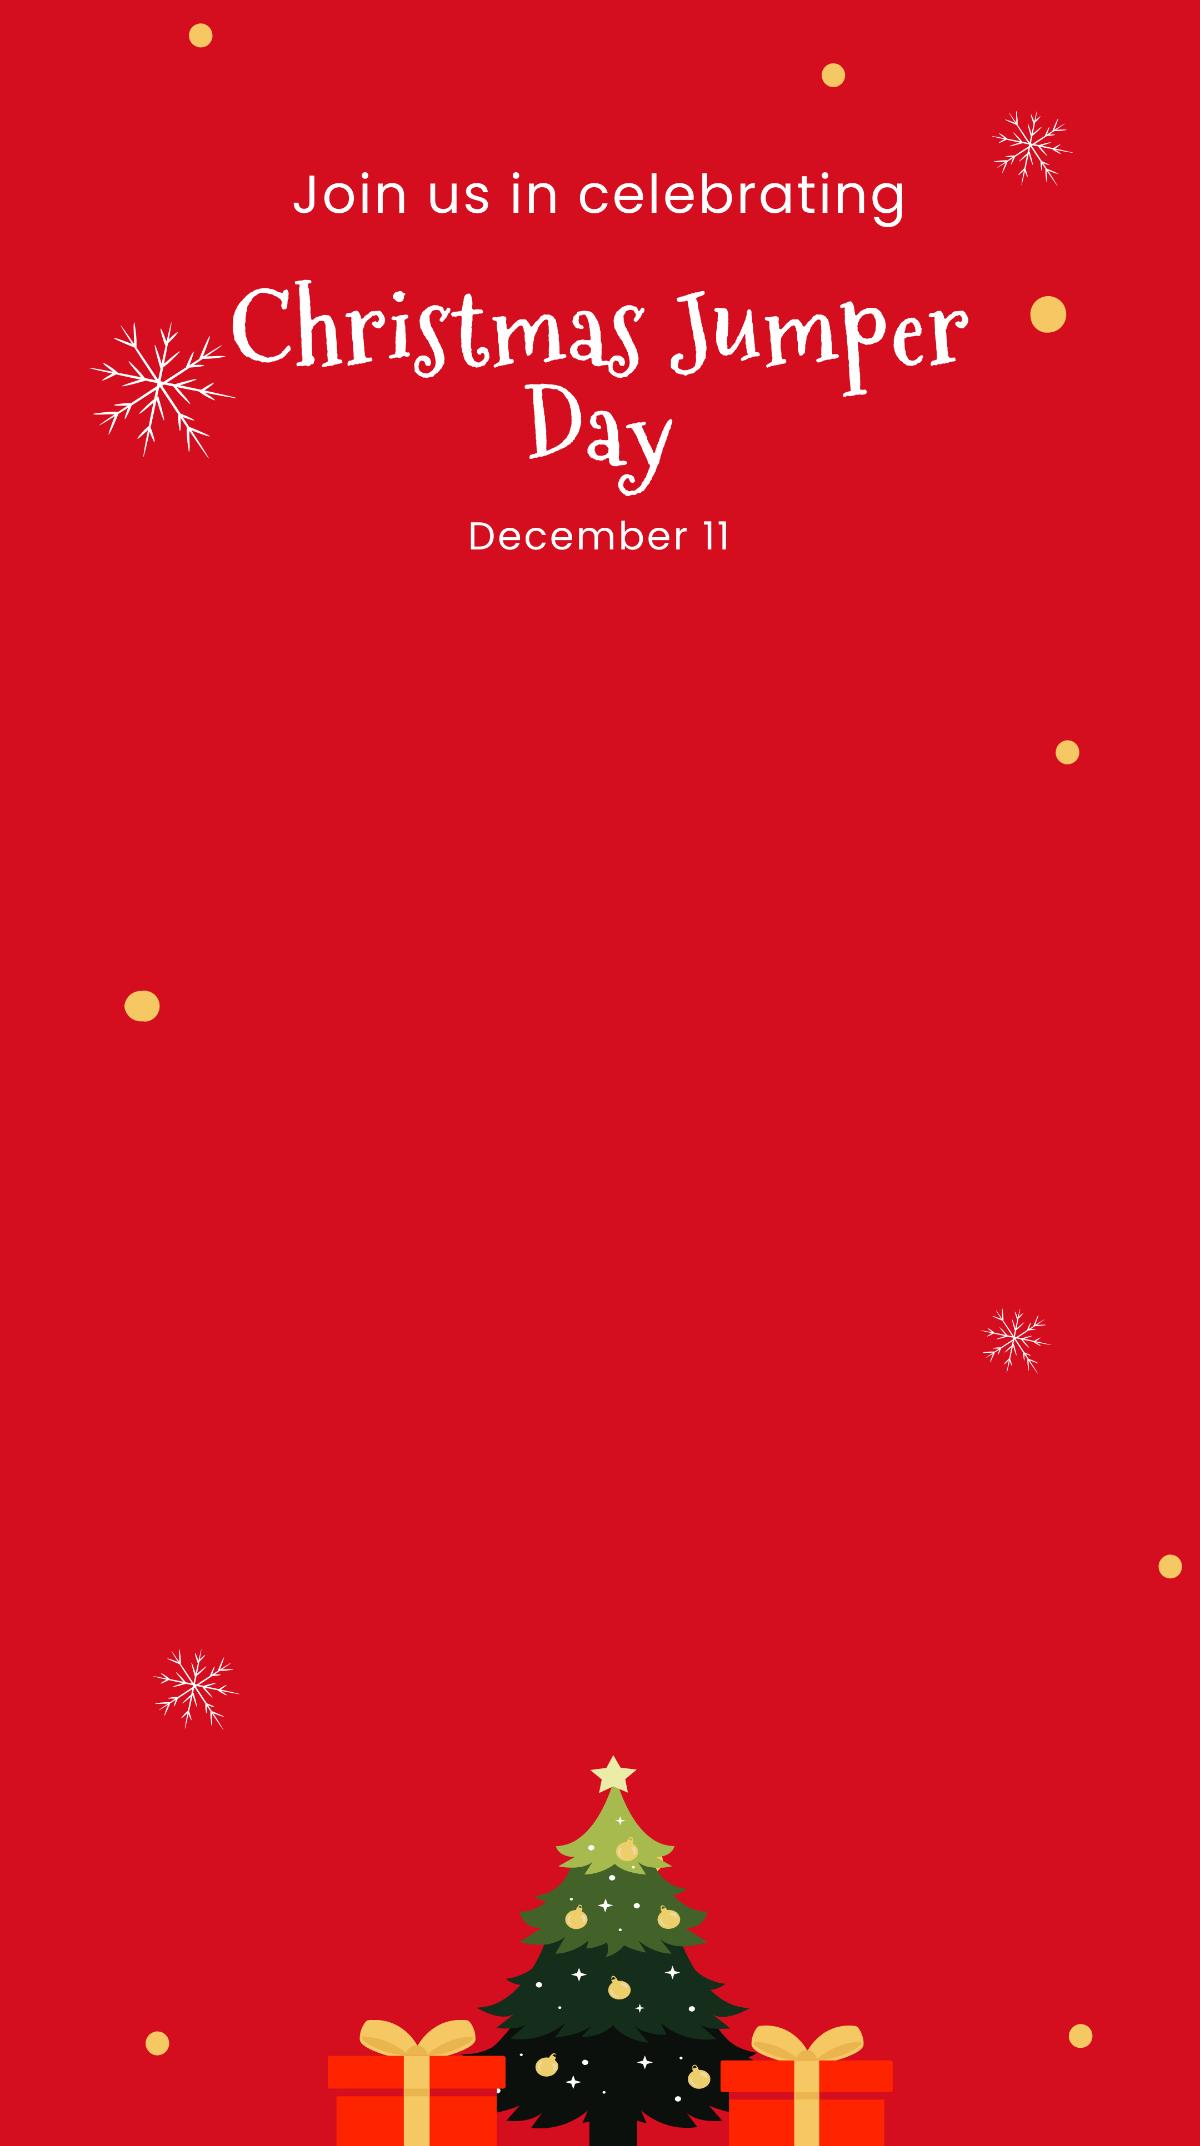 Christmas Jumper Day Charity Snapchat Geofilter Template